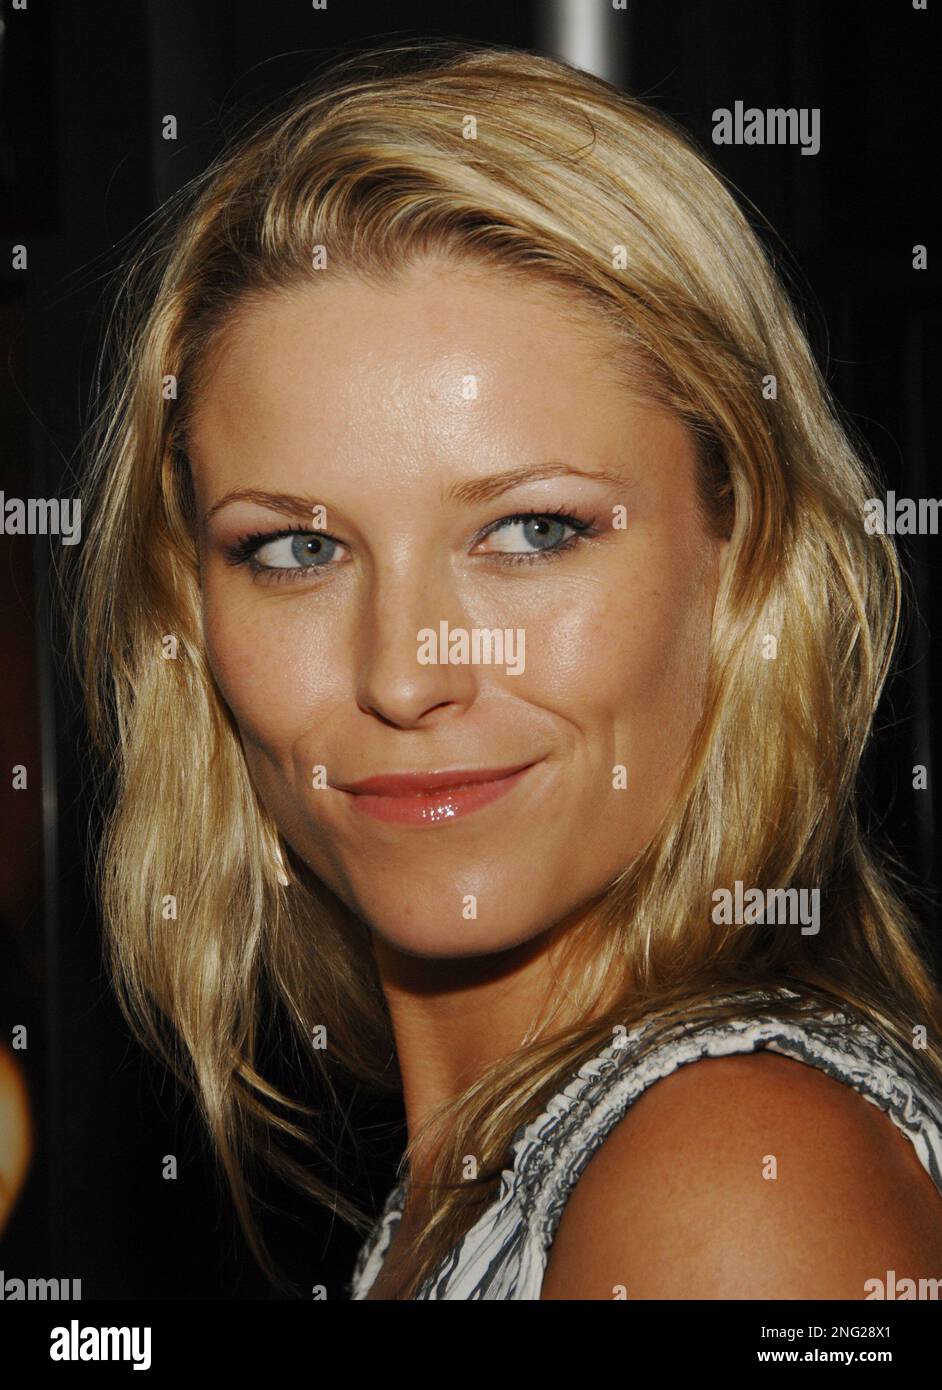 Actress Kiera Chaplin attends a special screening of "Lust, Caution" at the Landmark Sunshine Cinema, Thursday, Sept. 27, 2007 in New York. (AP Photo/Evan Agostini) Stock Photo